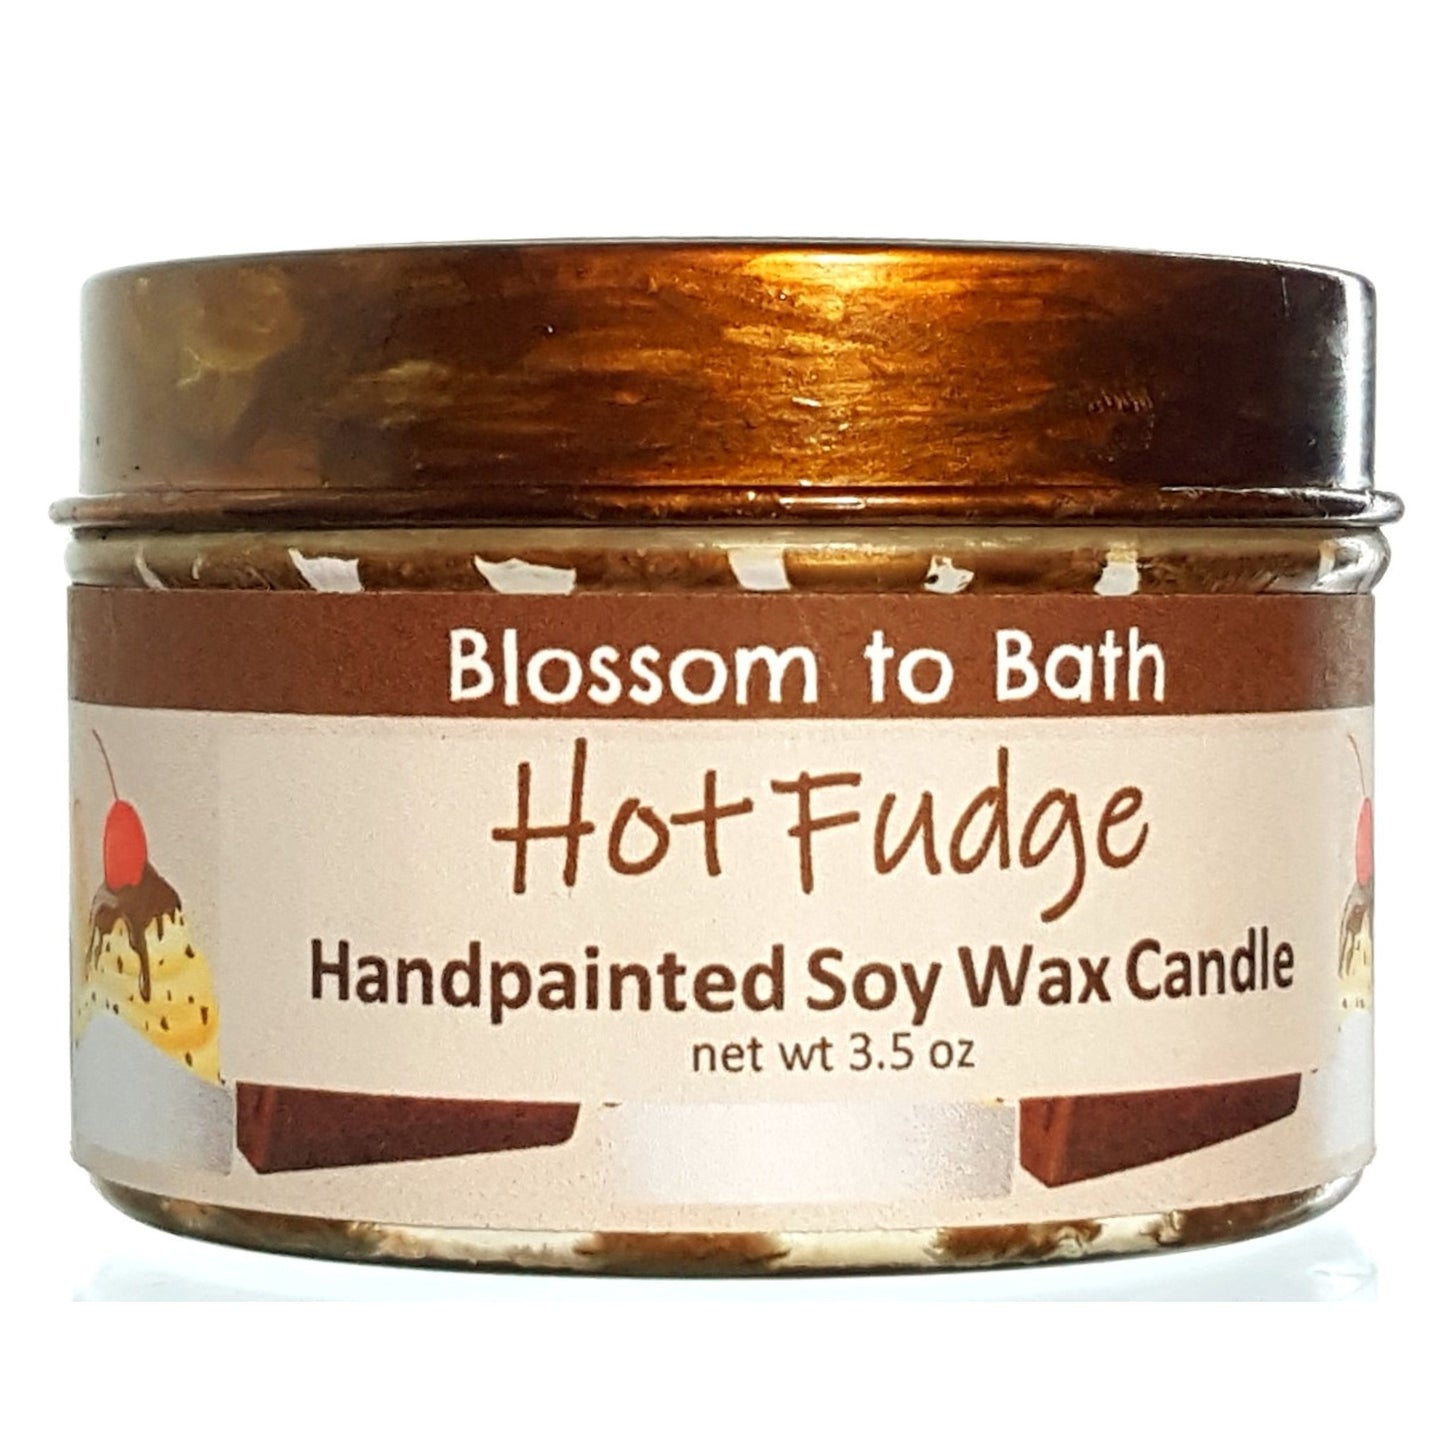 Buy Blossom to Bath Hot Fudge Handpainted Soy Wax Candle from Flowersong Soap Studio.  Enjoy one of a kind décor and fill the air with a charming fragrance that lasts for hours  The fragrance is three layers deep in rich chocolate.